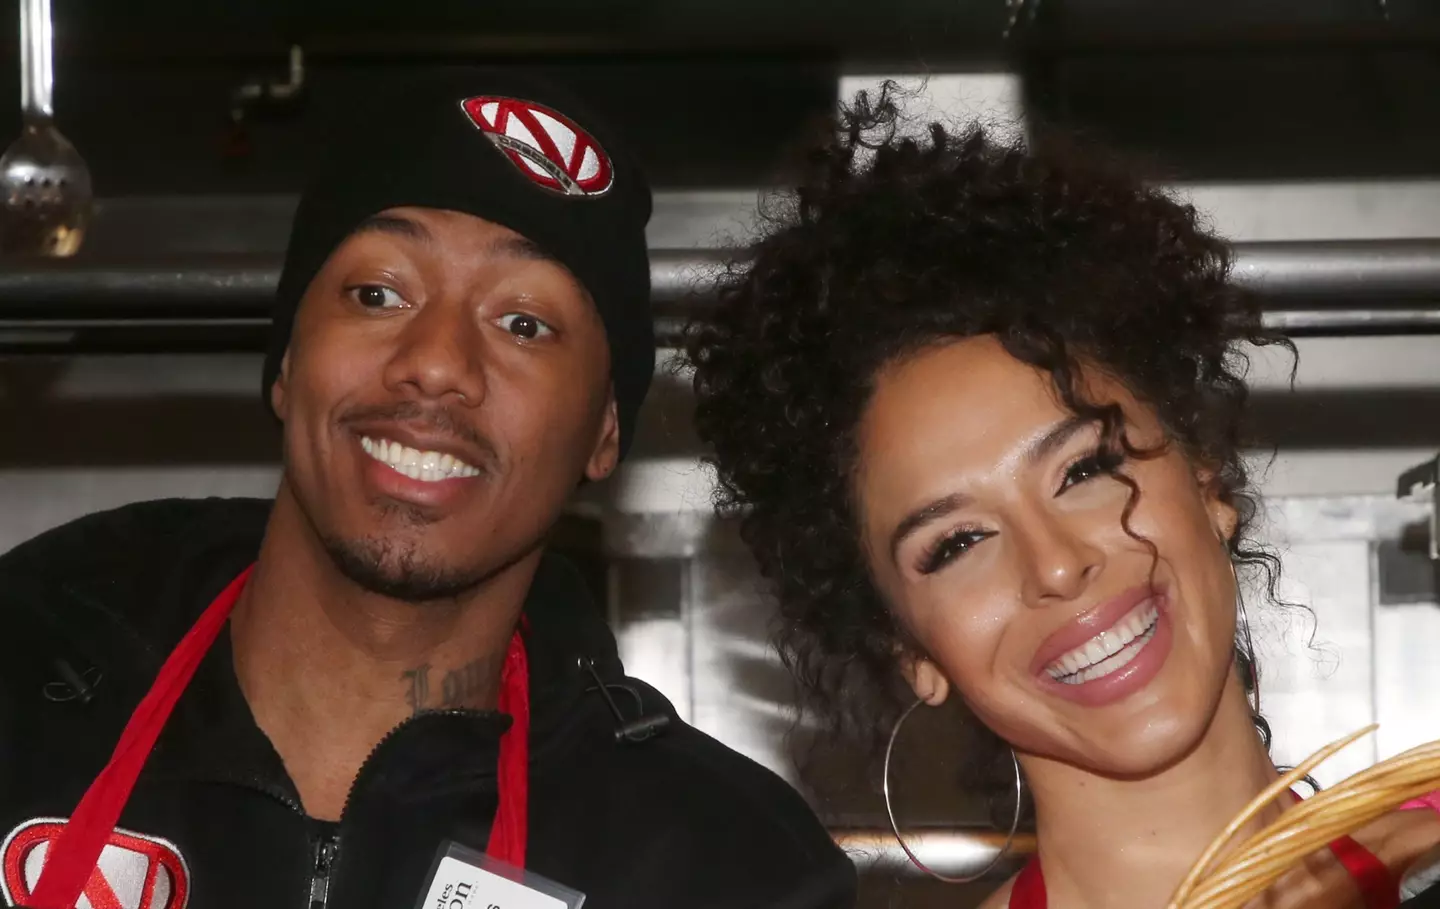 Nick Cannon and Brittany Bell have had their third child together.